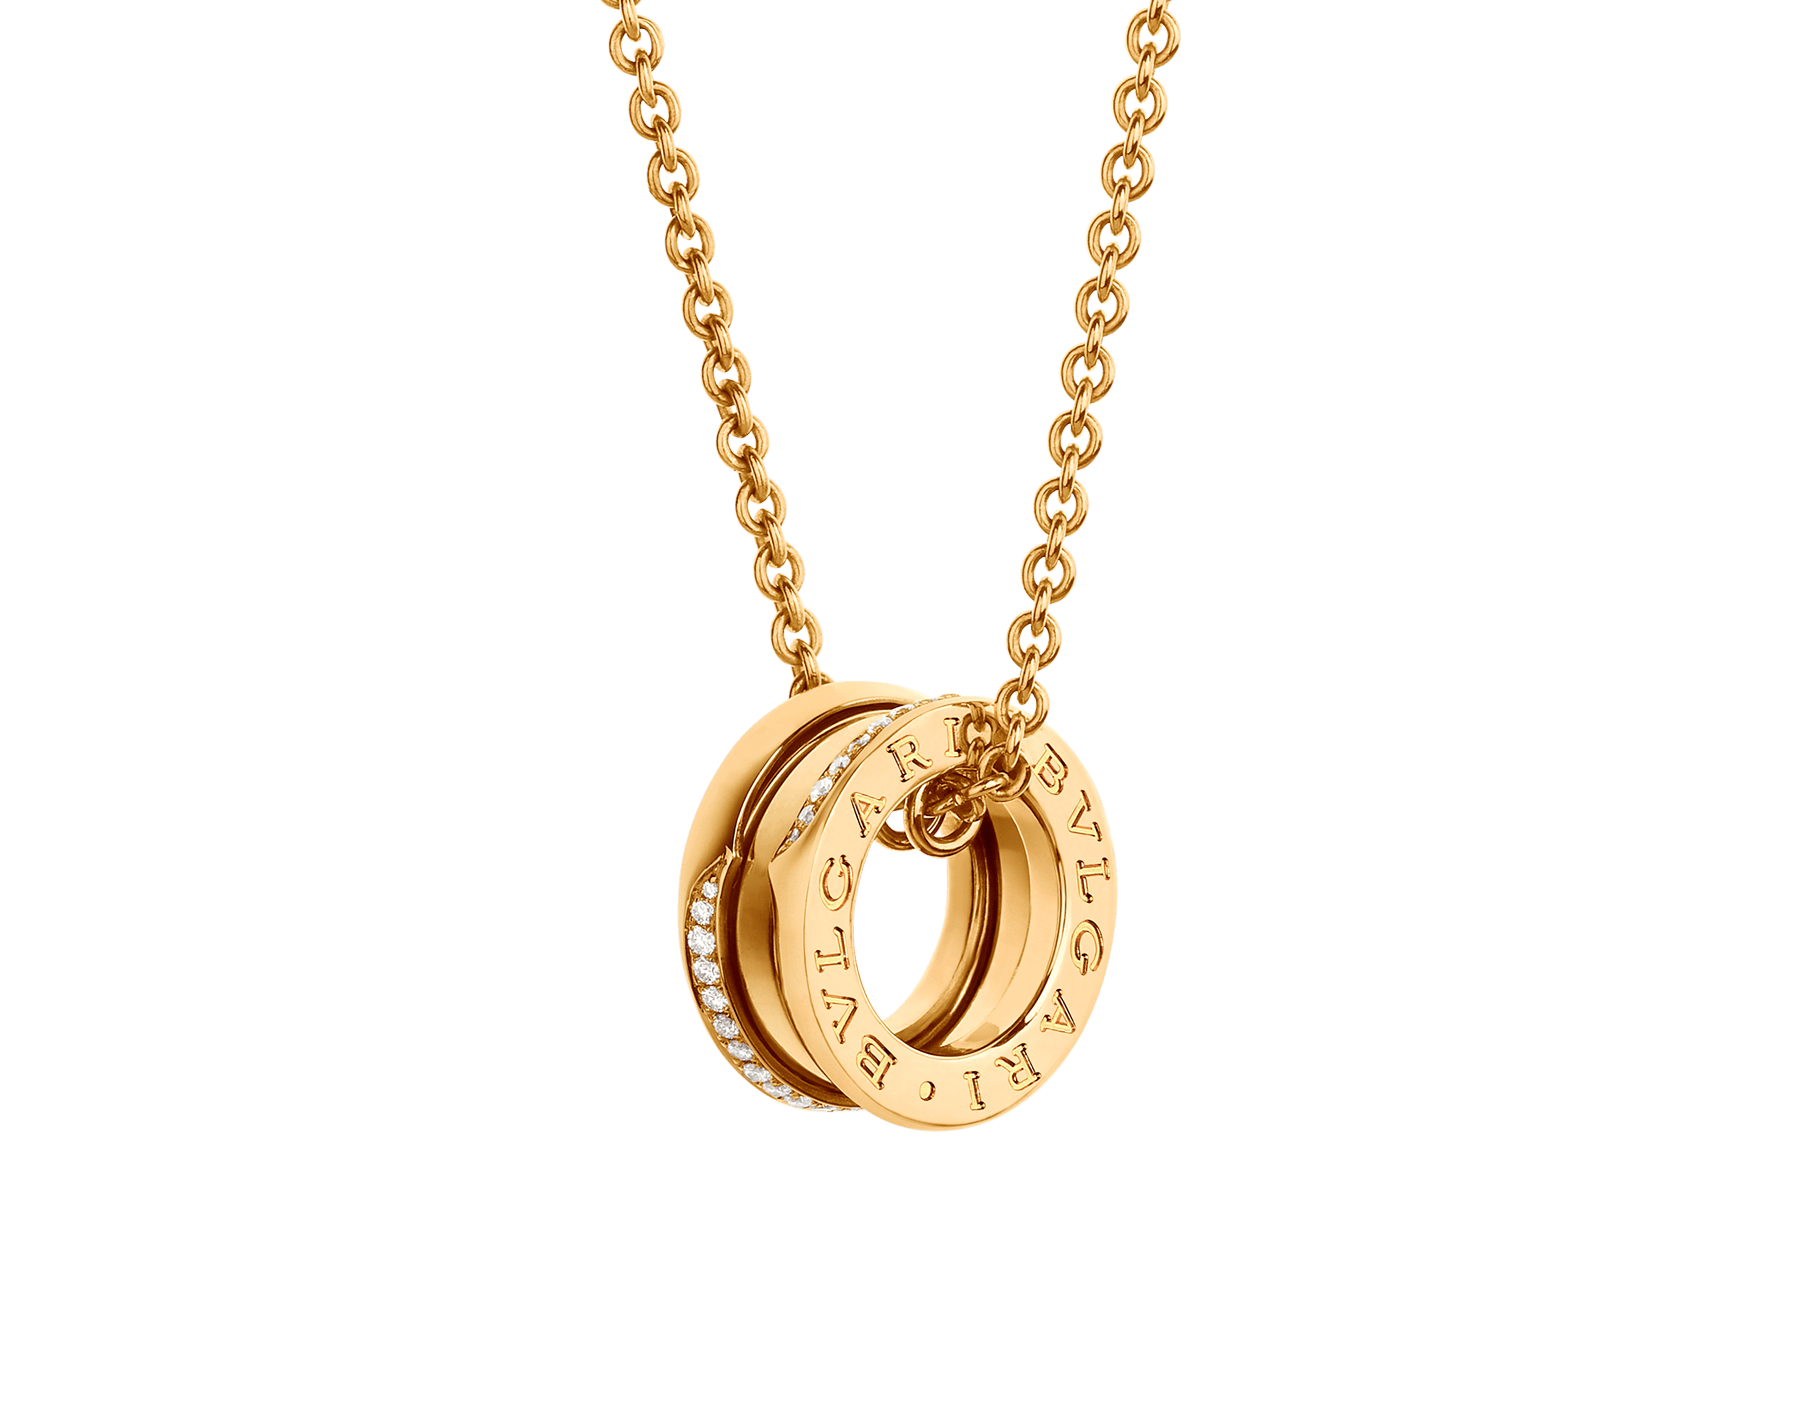 B.zero1 necklace with 18 kt yellow gold pendant set with demi-pavé diamonds on the edges and 18 kt yellow gold chain 359386 image 1